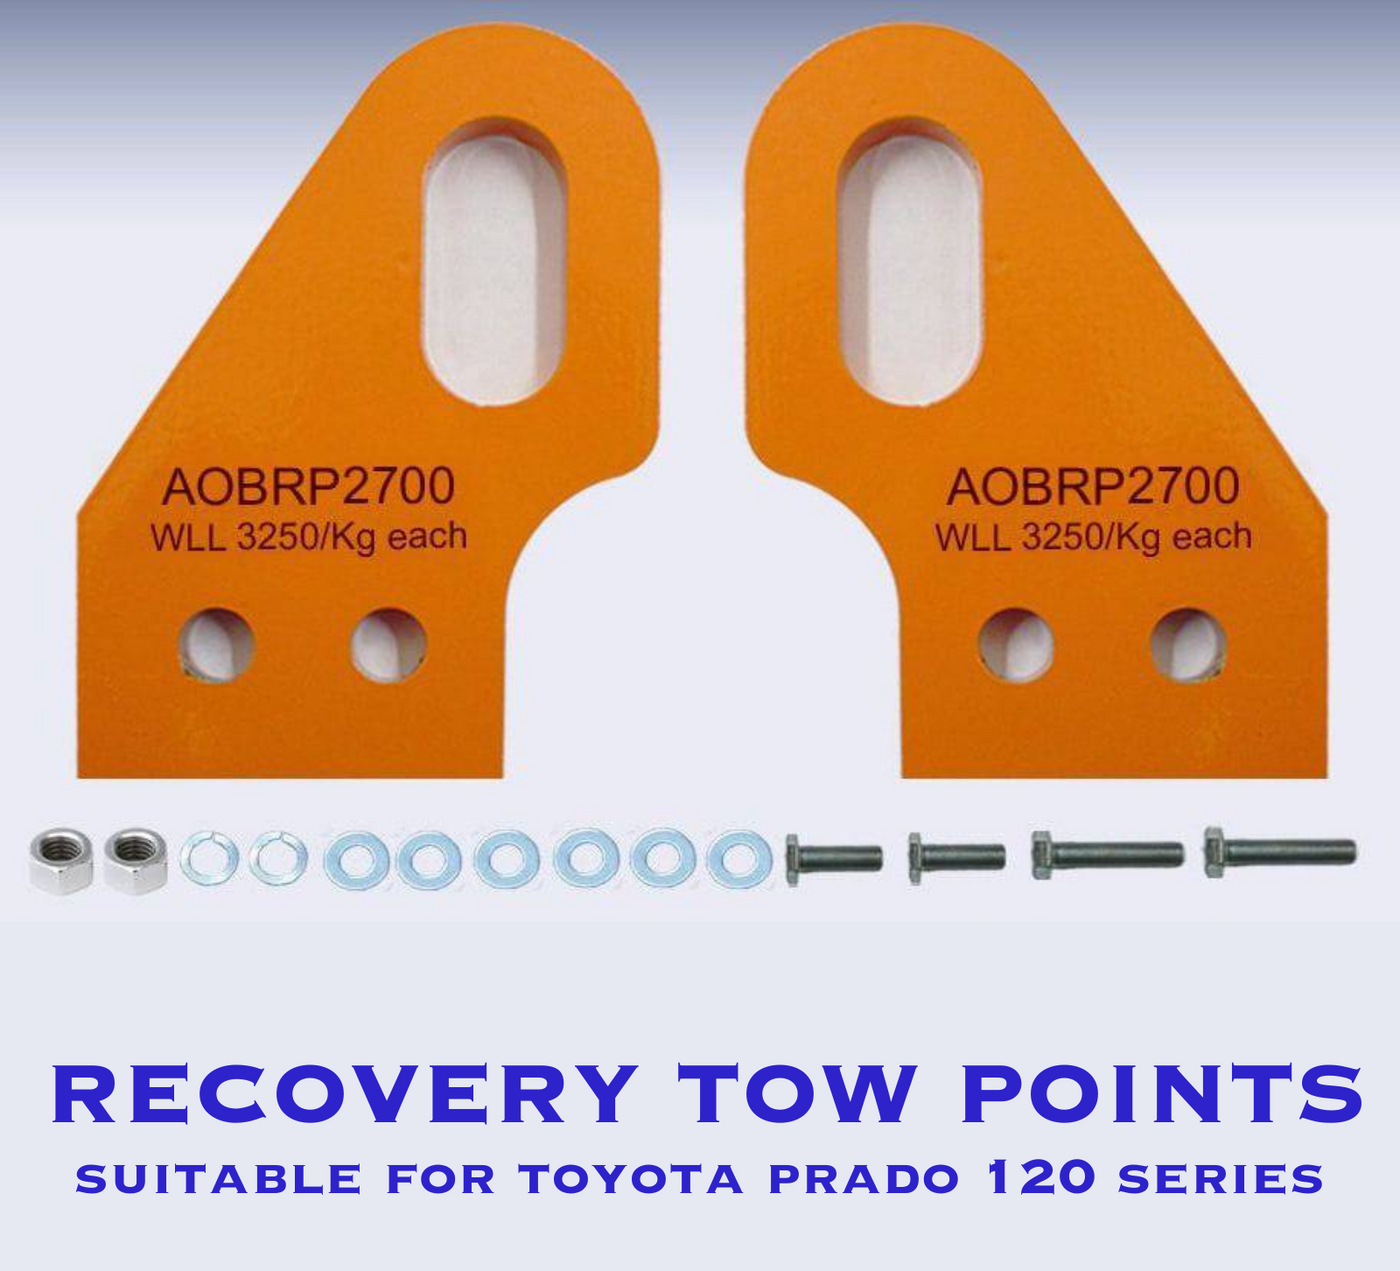 Recovery Tow Points 2700 Suitable For Toyota Prado 120 (Online only) - OZI4X4 PTY LTD